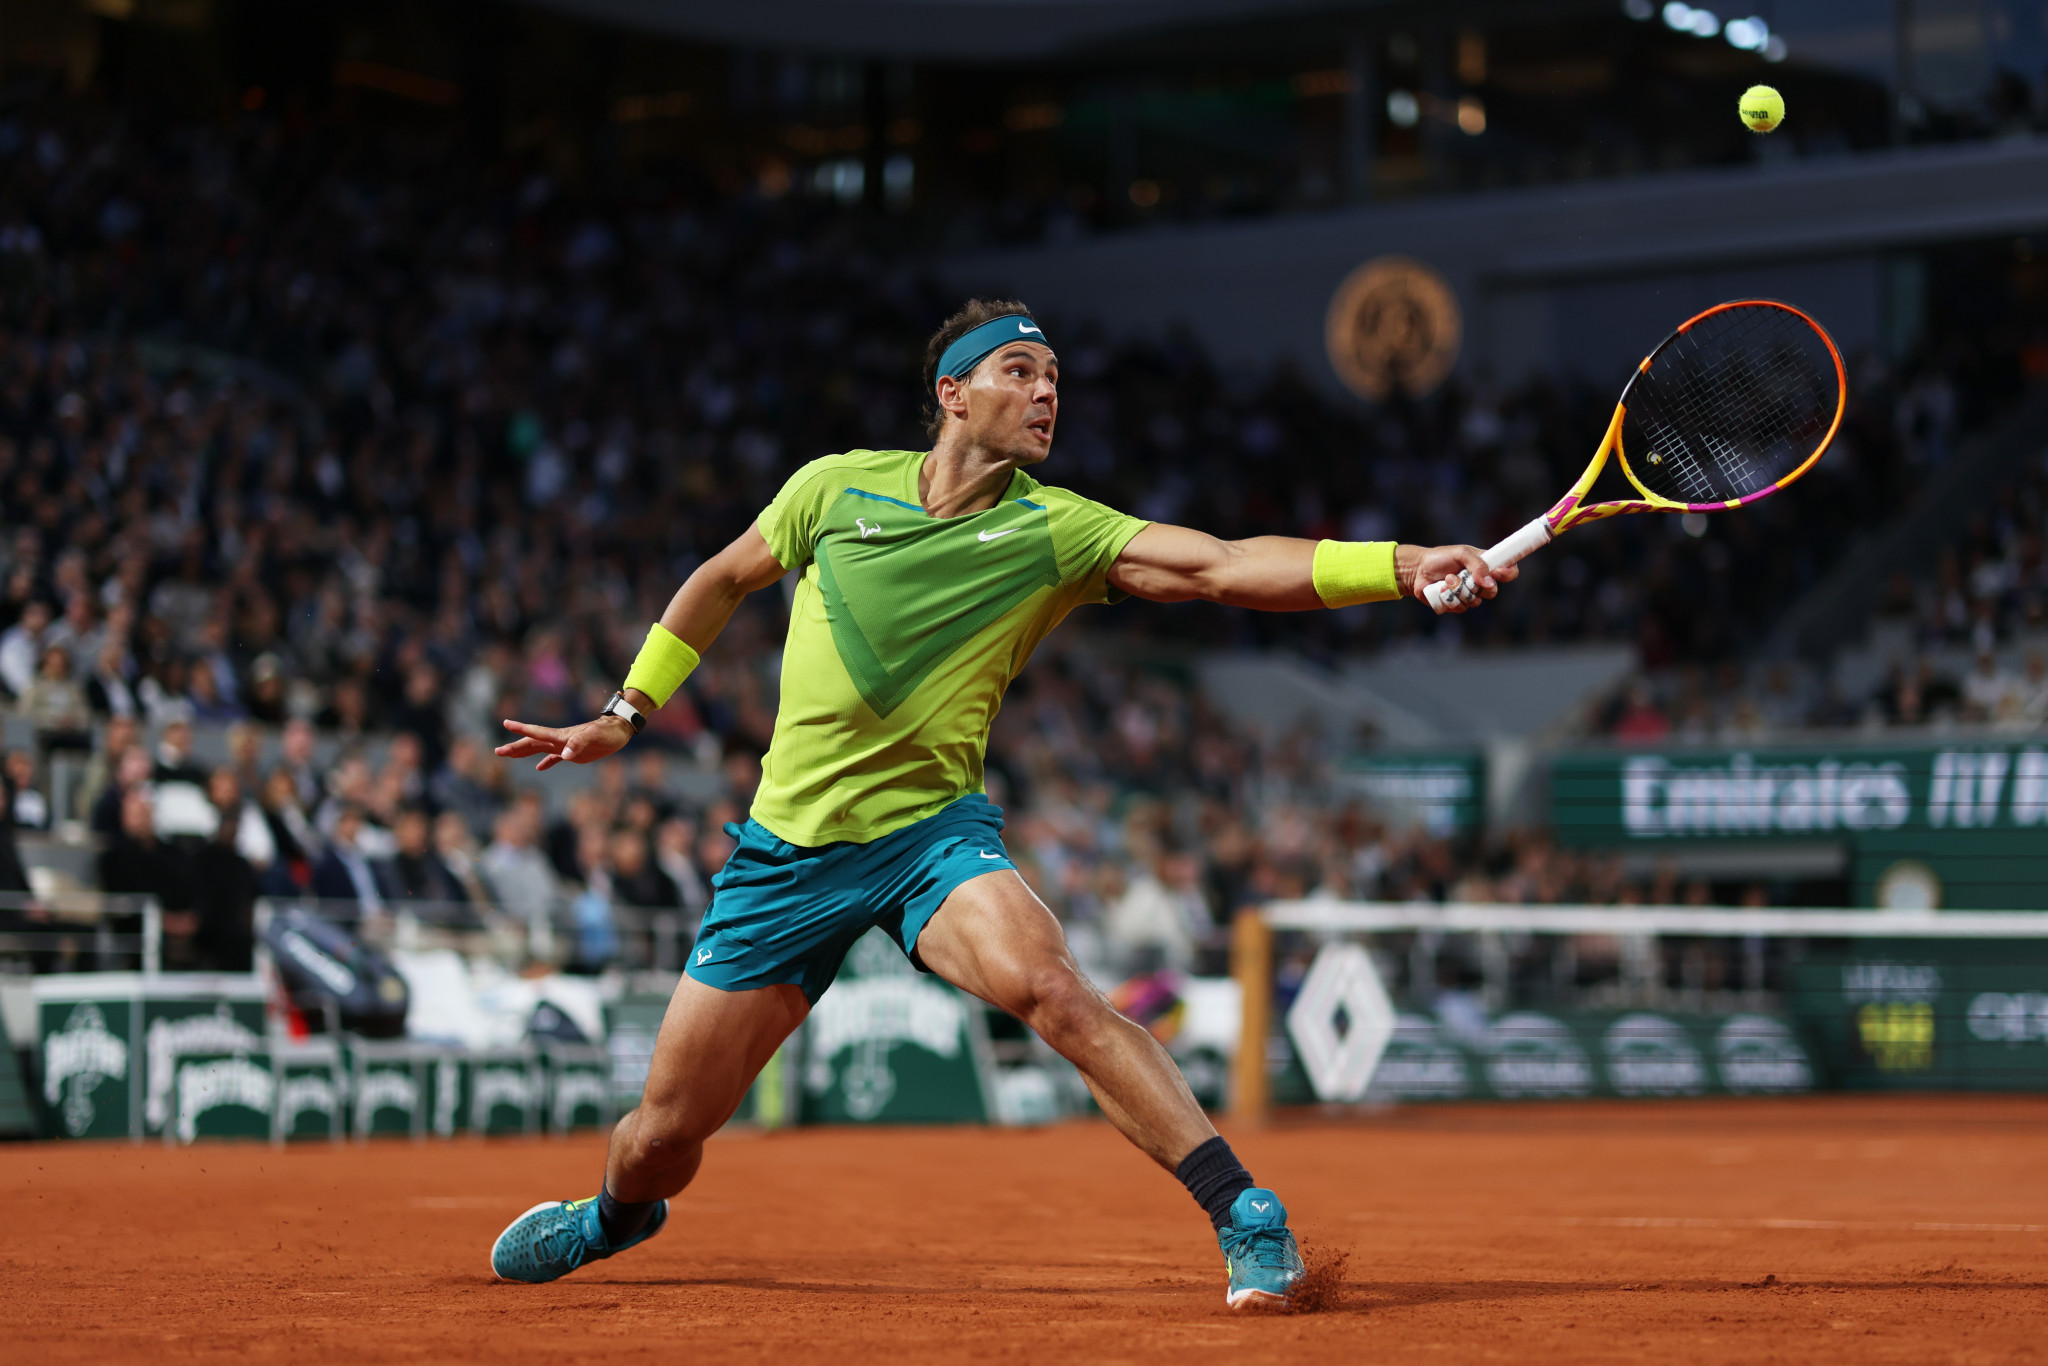 Nadal And Zverev Claim Four Set Victories In French Open Quarter